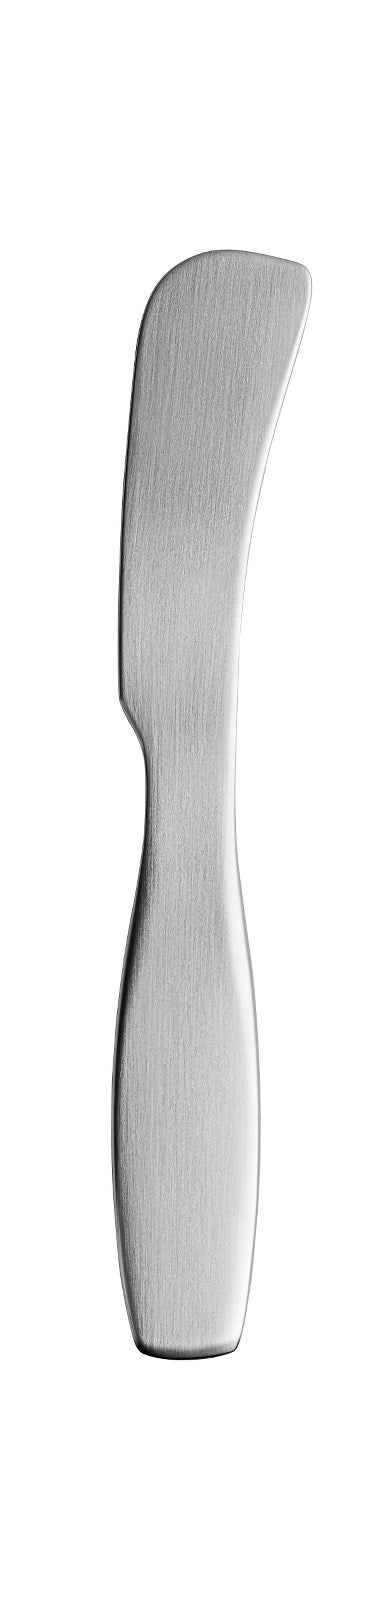 product image for Collective Tools Flatware design by Antonio Citterio for Iittala 84